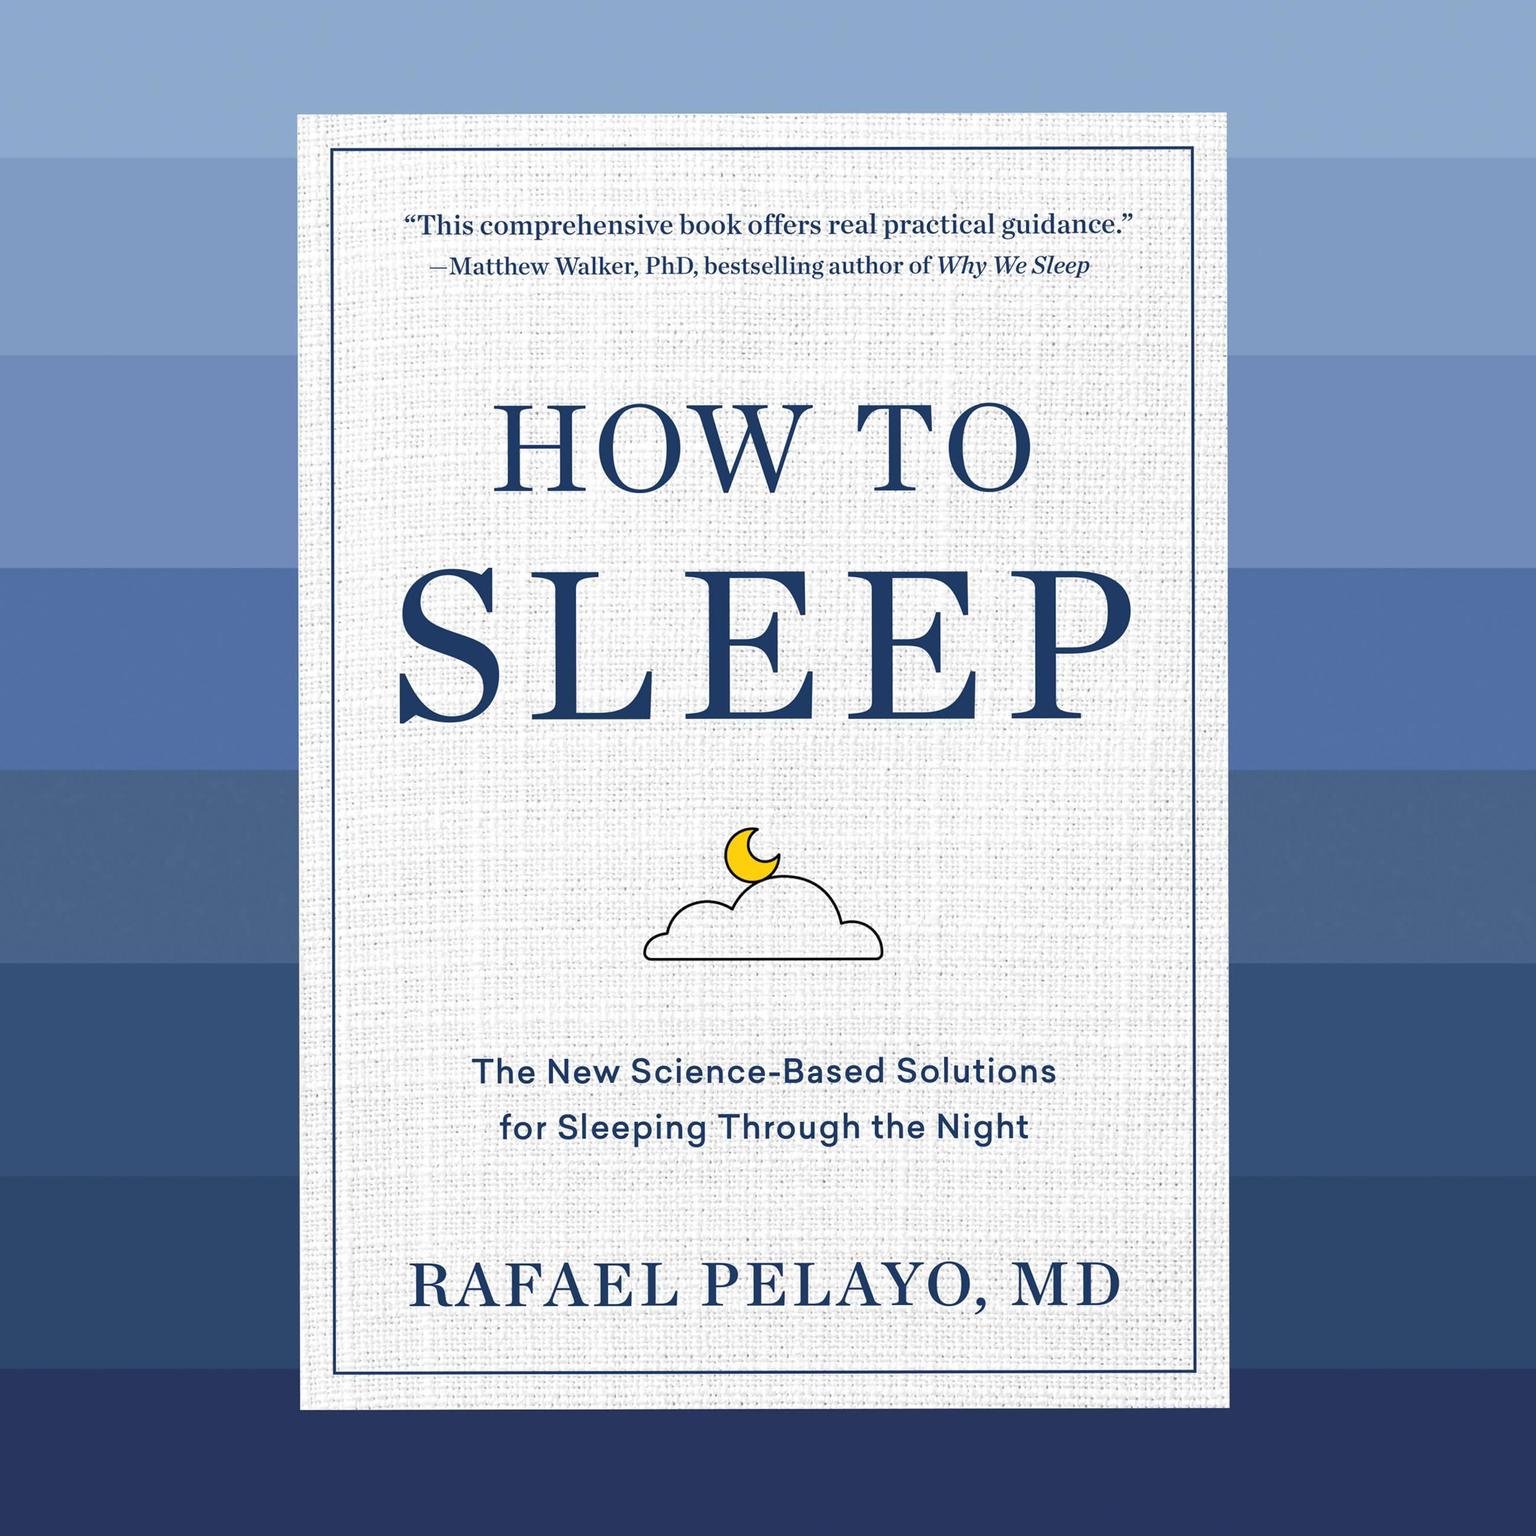 How to Sleep: The New Science-Based Solutions for Sleeping Through the Night Audiobook, by Rafael Pelayo